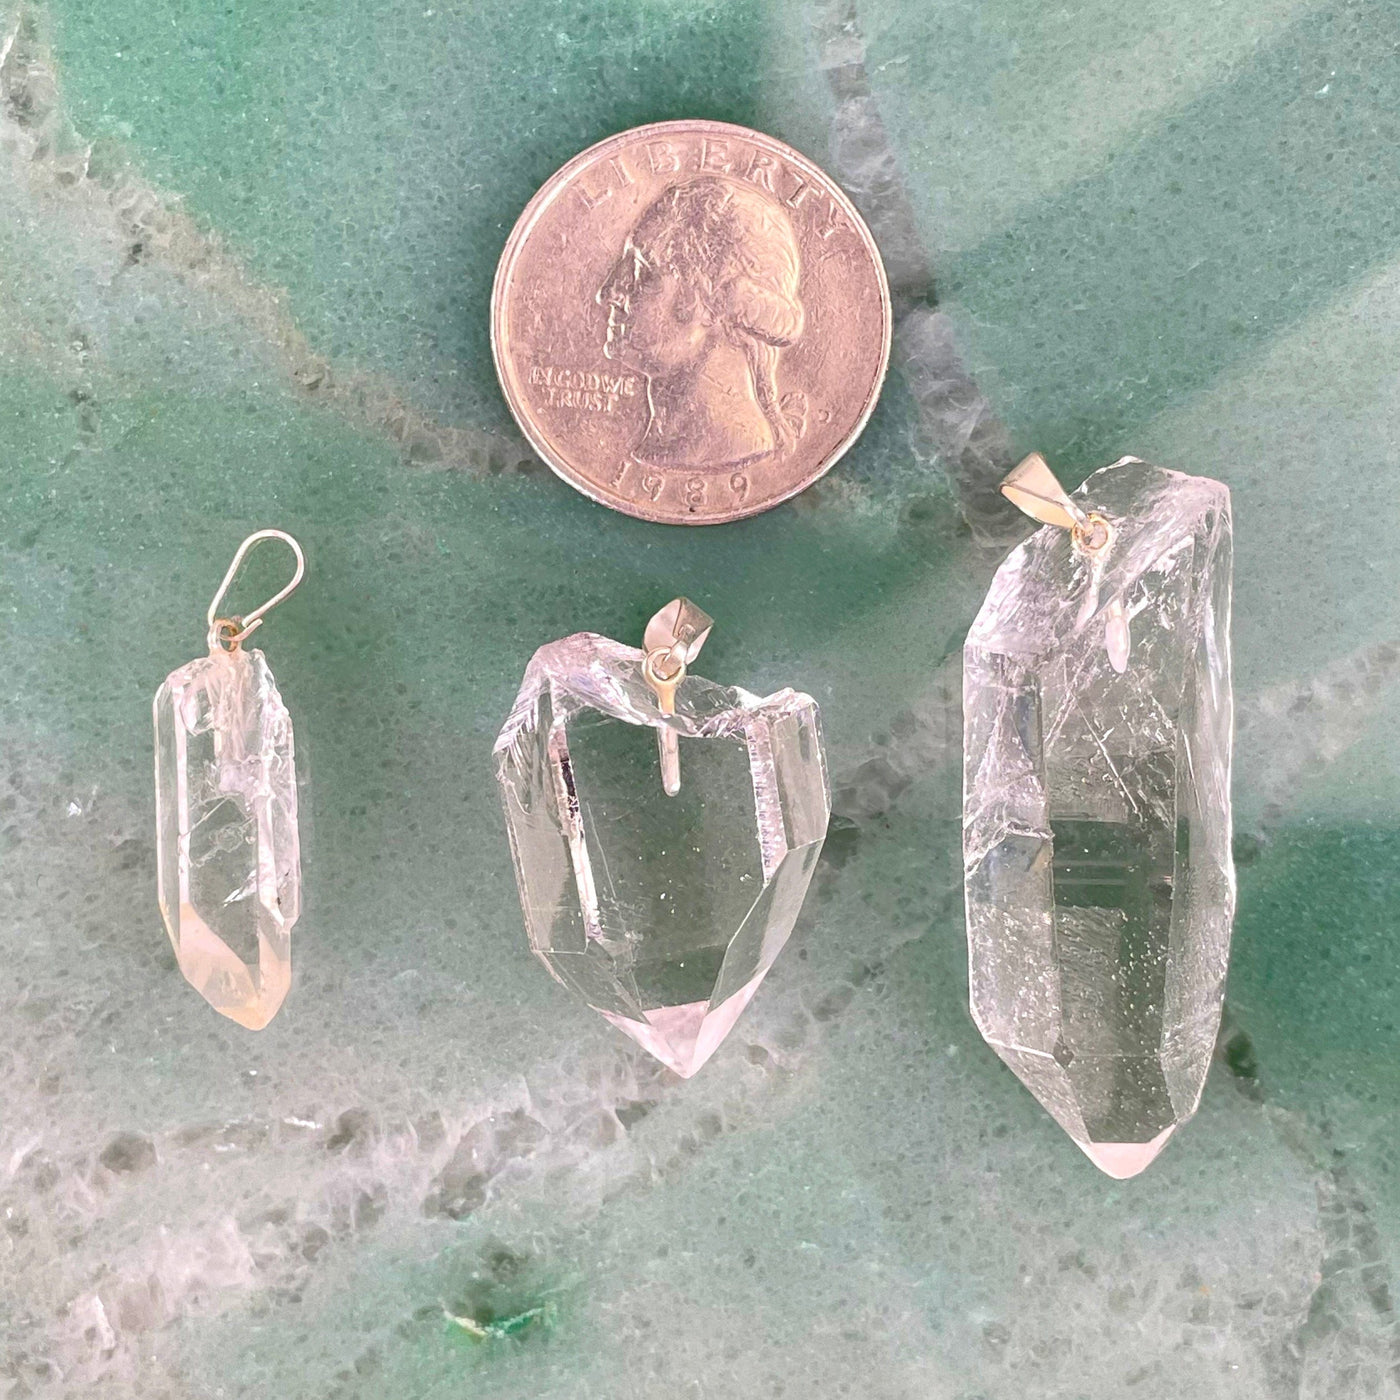 three crystal quartz rough point pendants with quarter for size reference